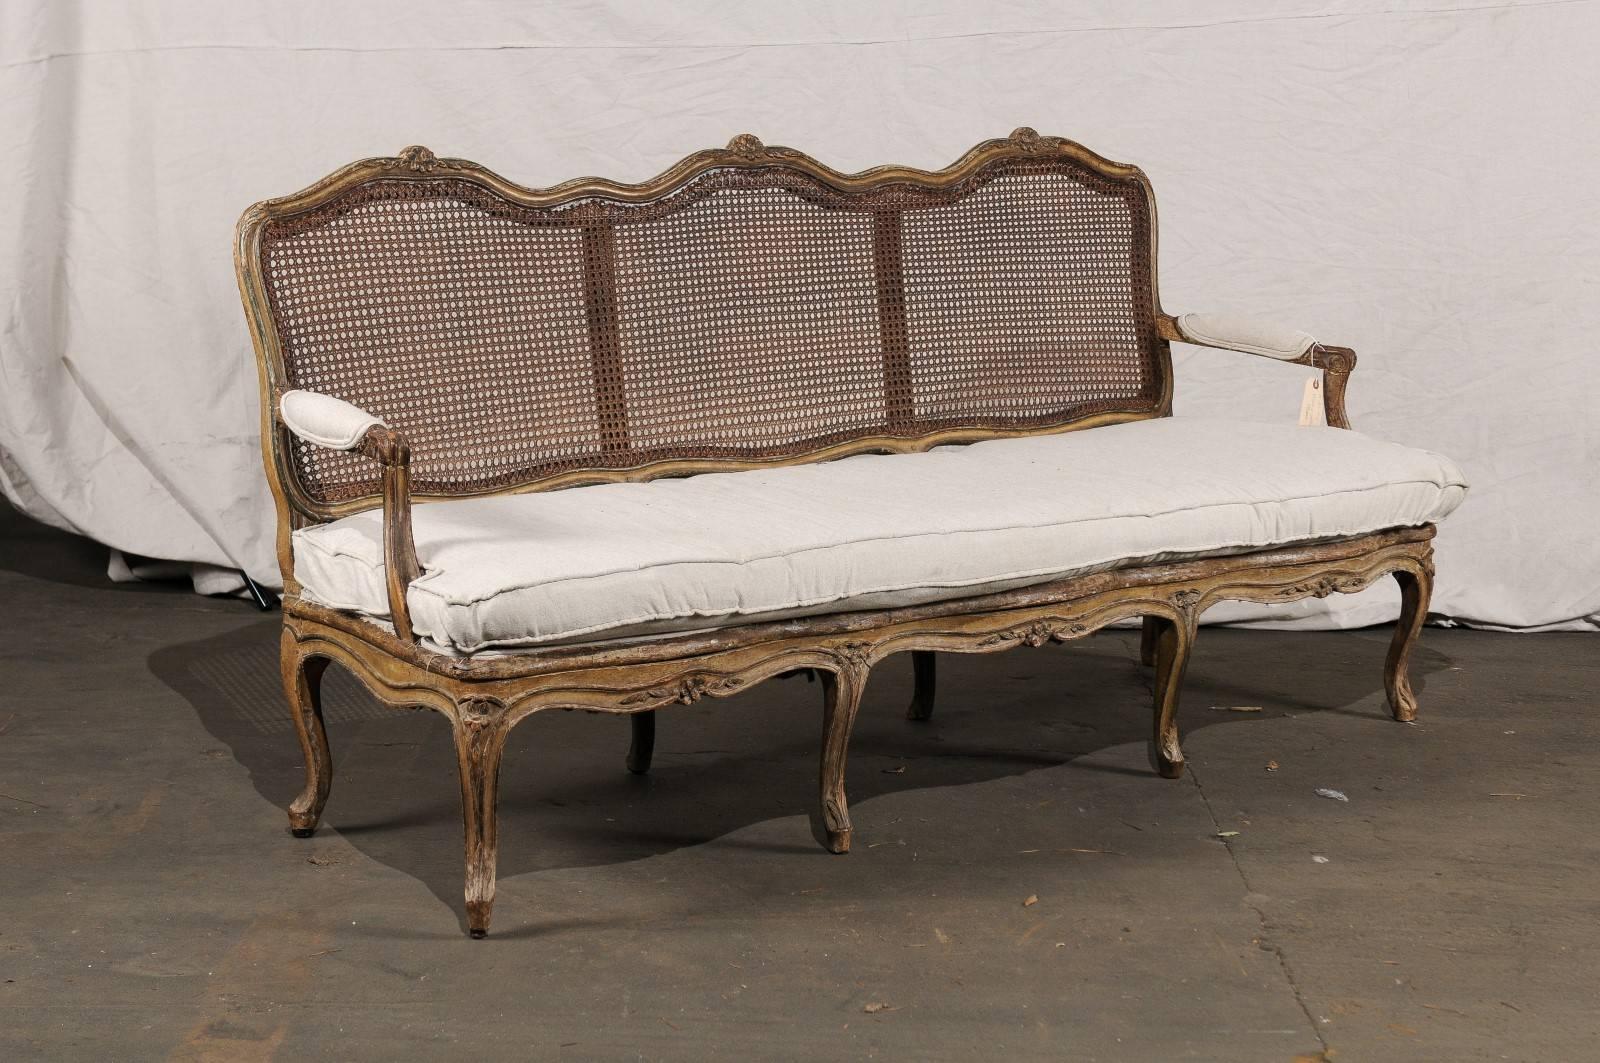 Régence 18th-19th Century Regence Settee with Cane